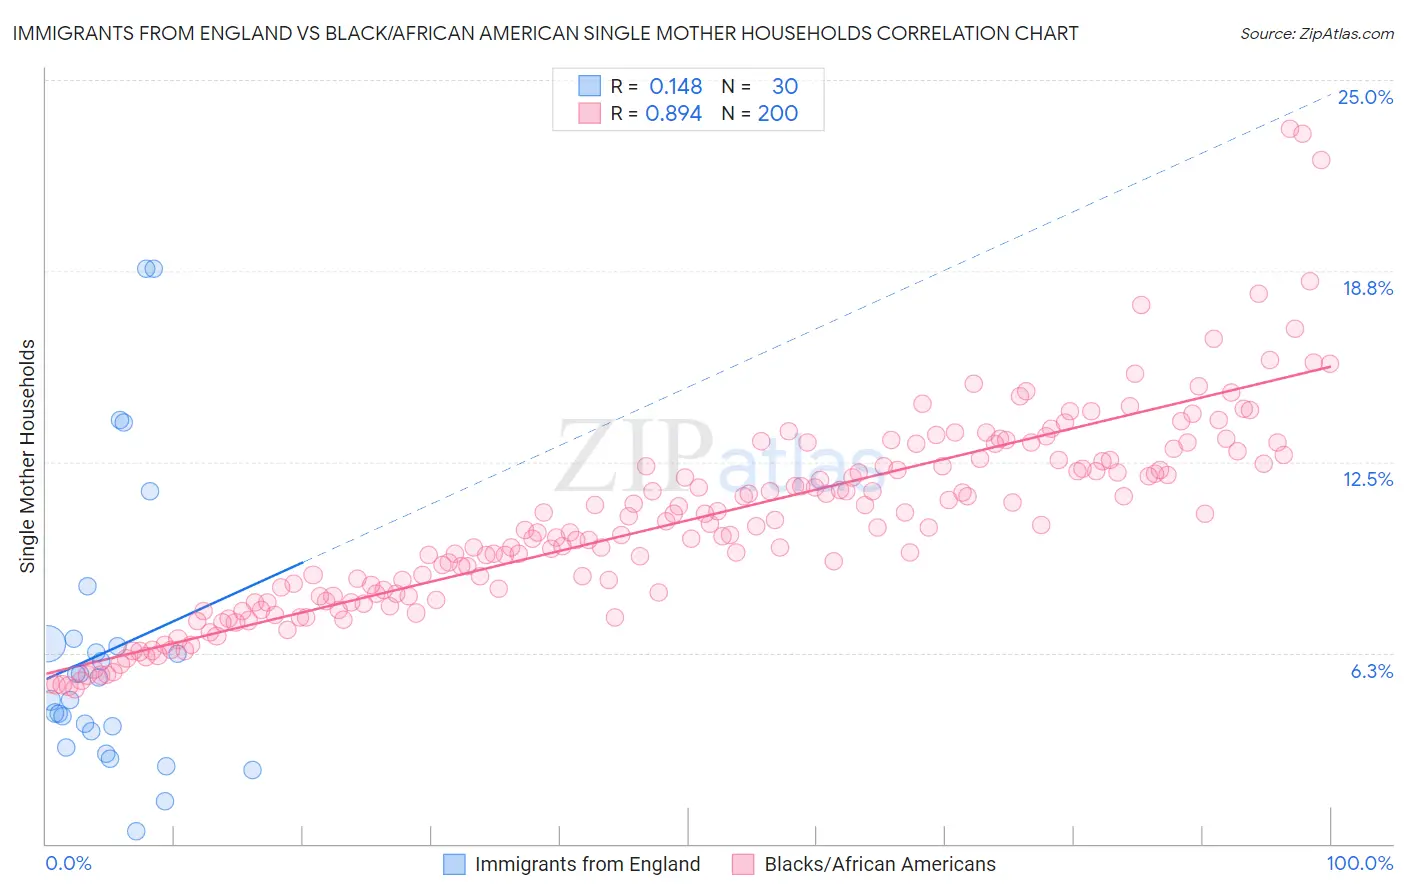 Immigrants from England vs Black/African American Single Mother Households